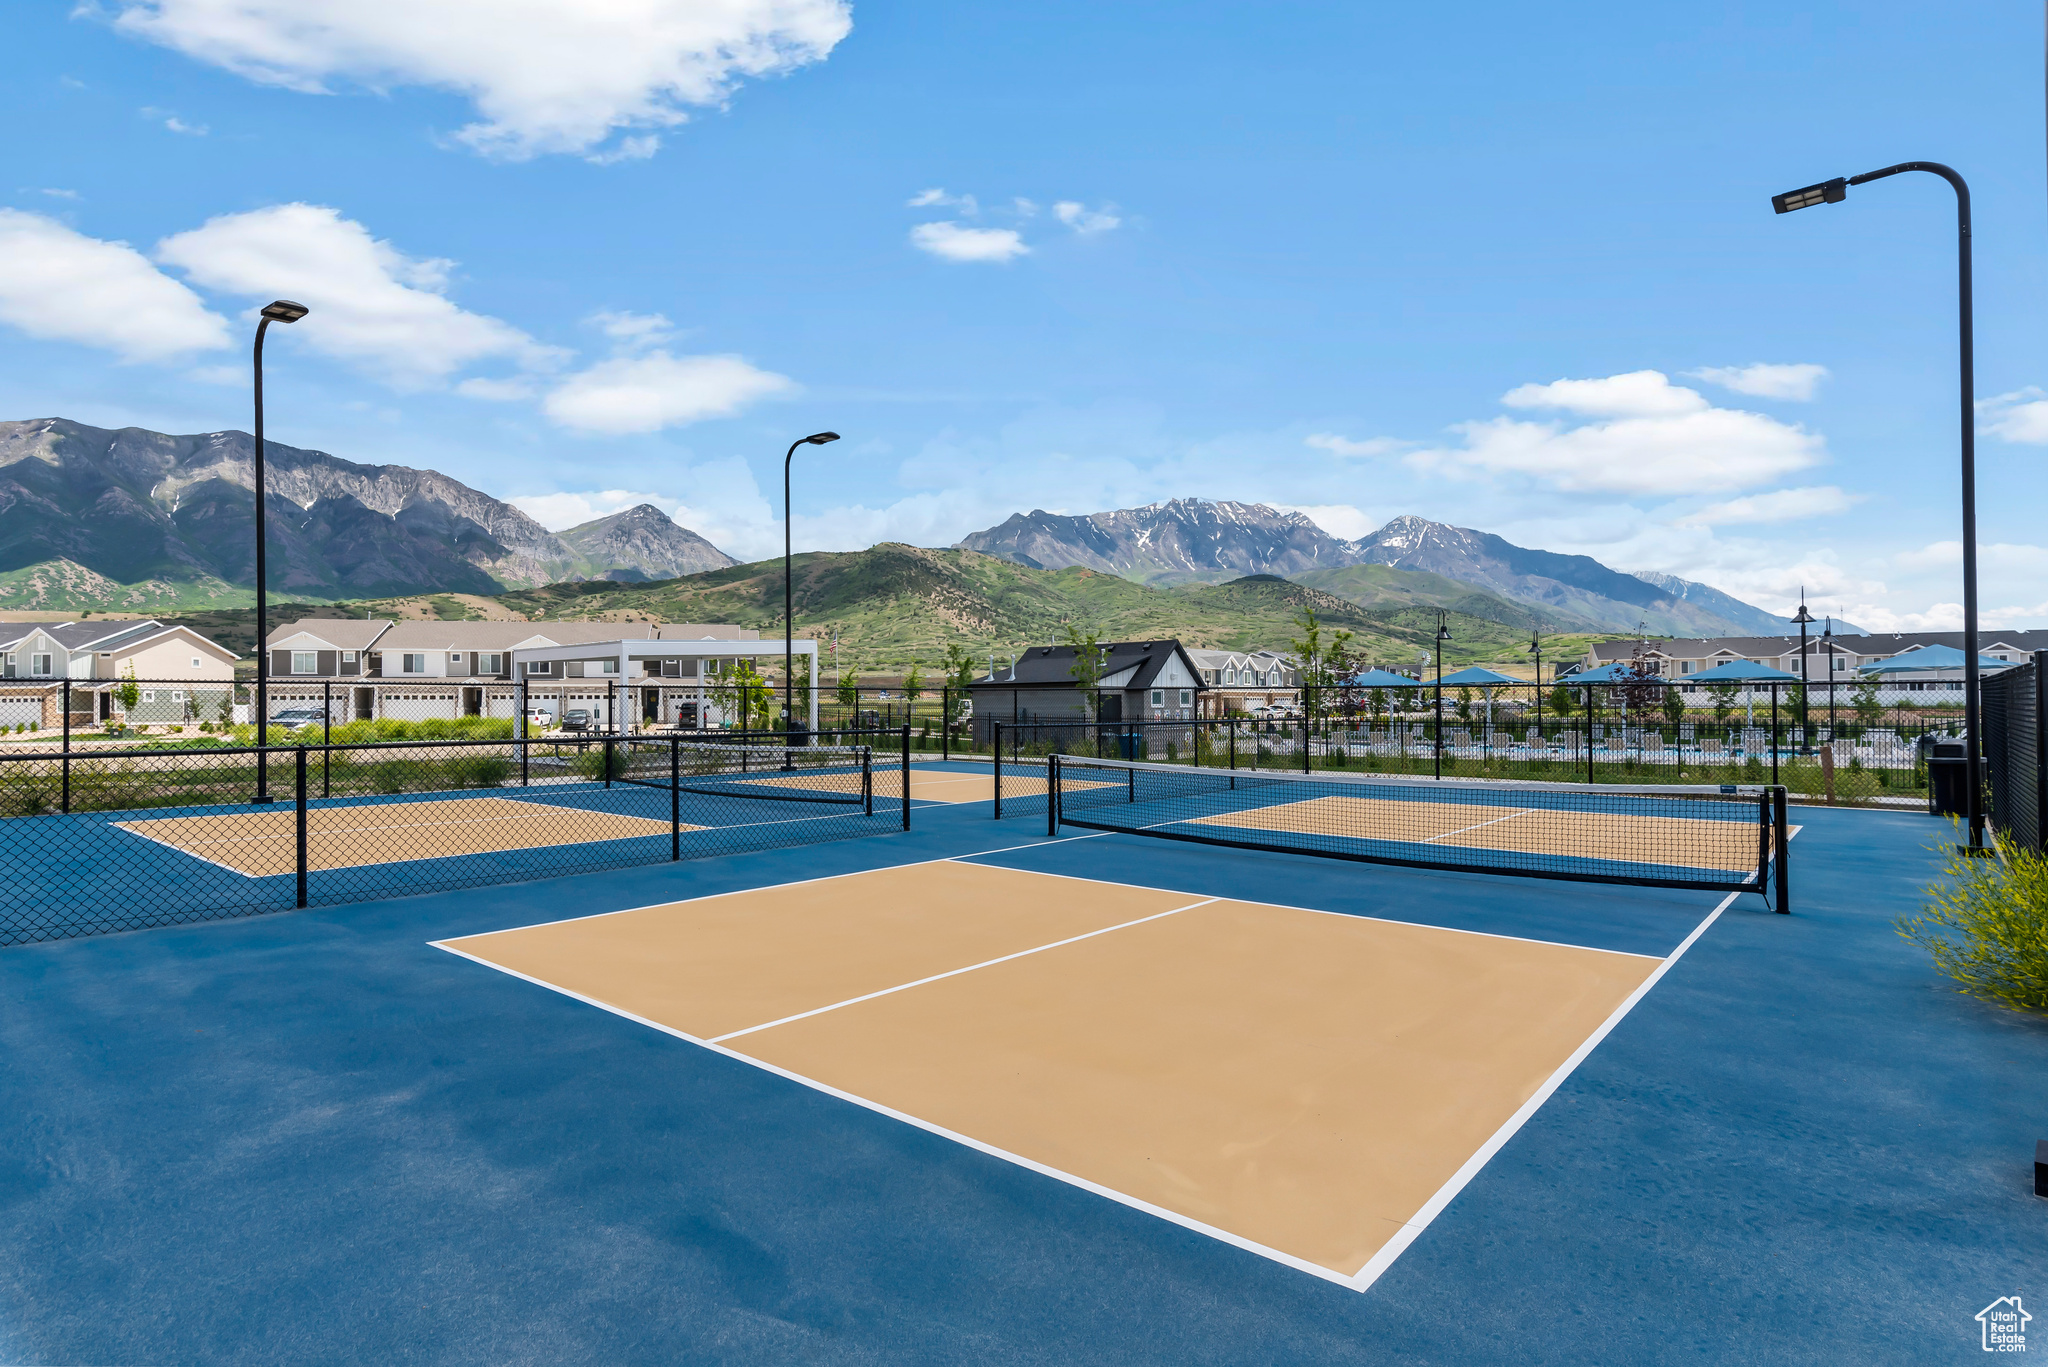 View of sport court featuring a mountain view